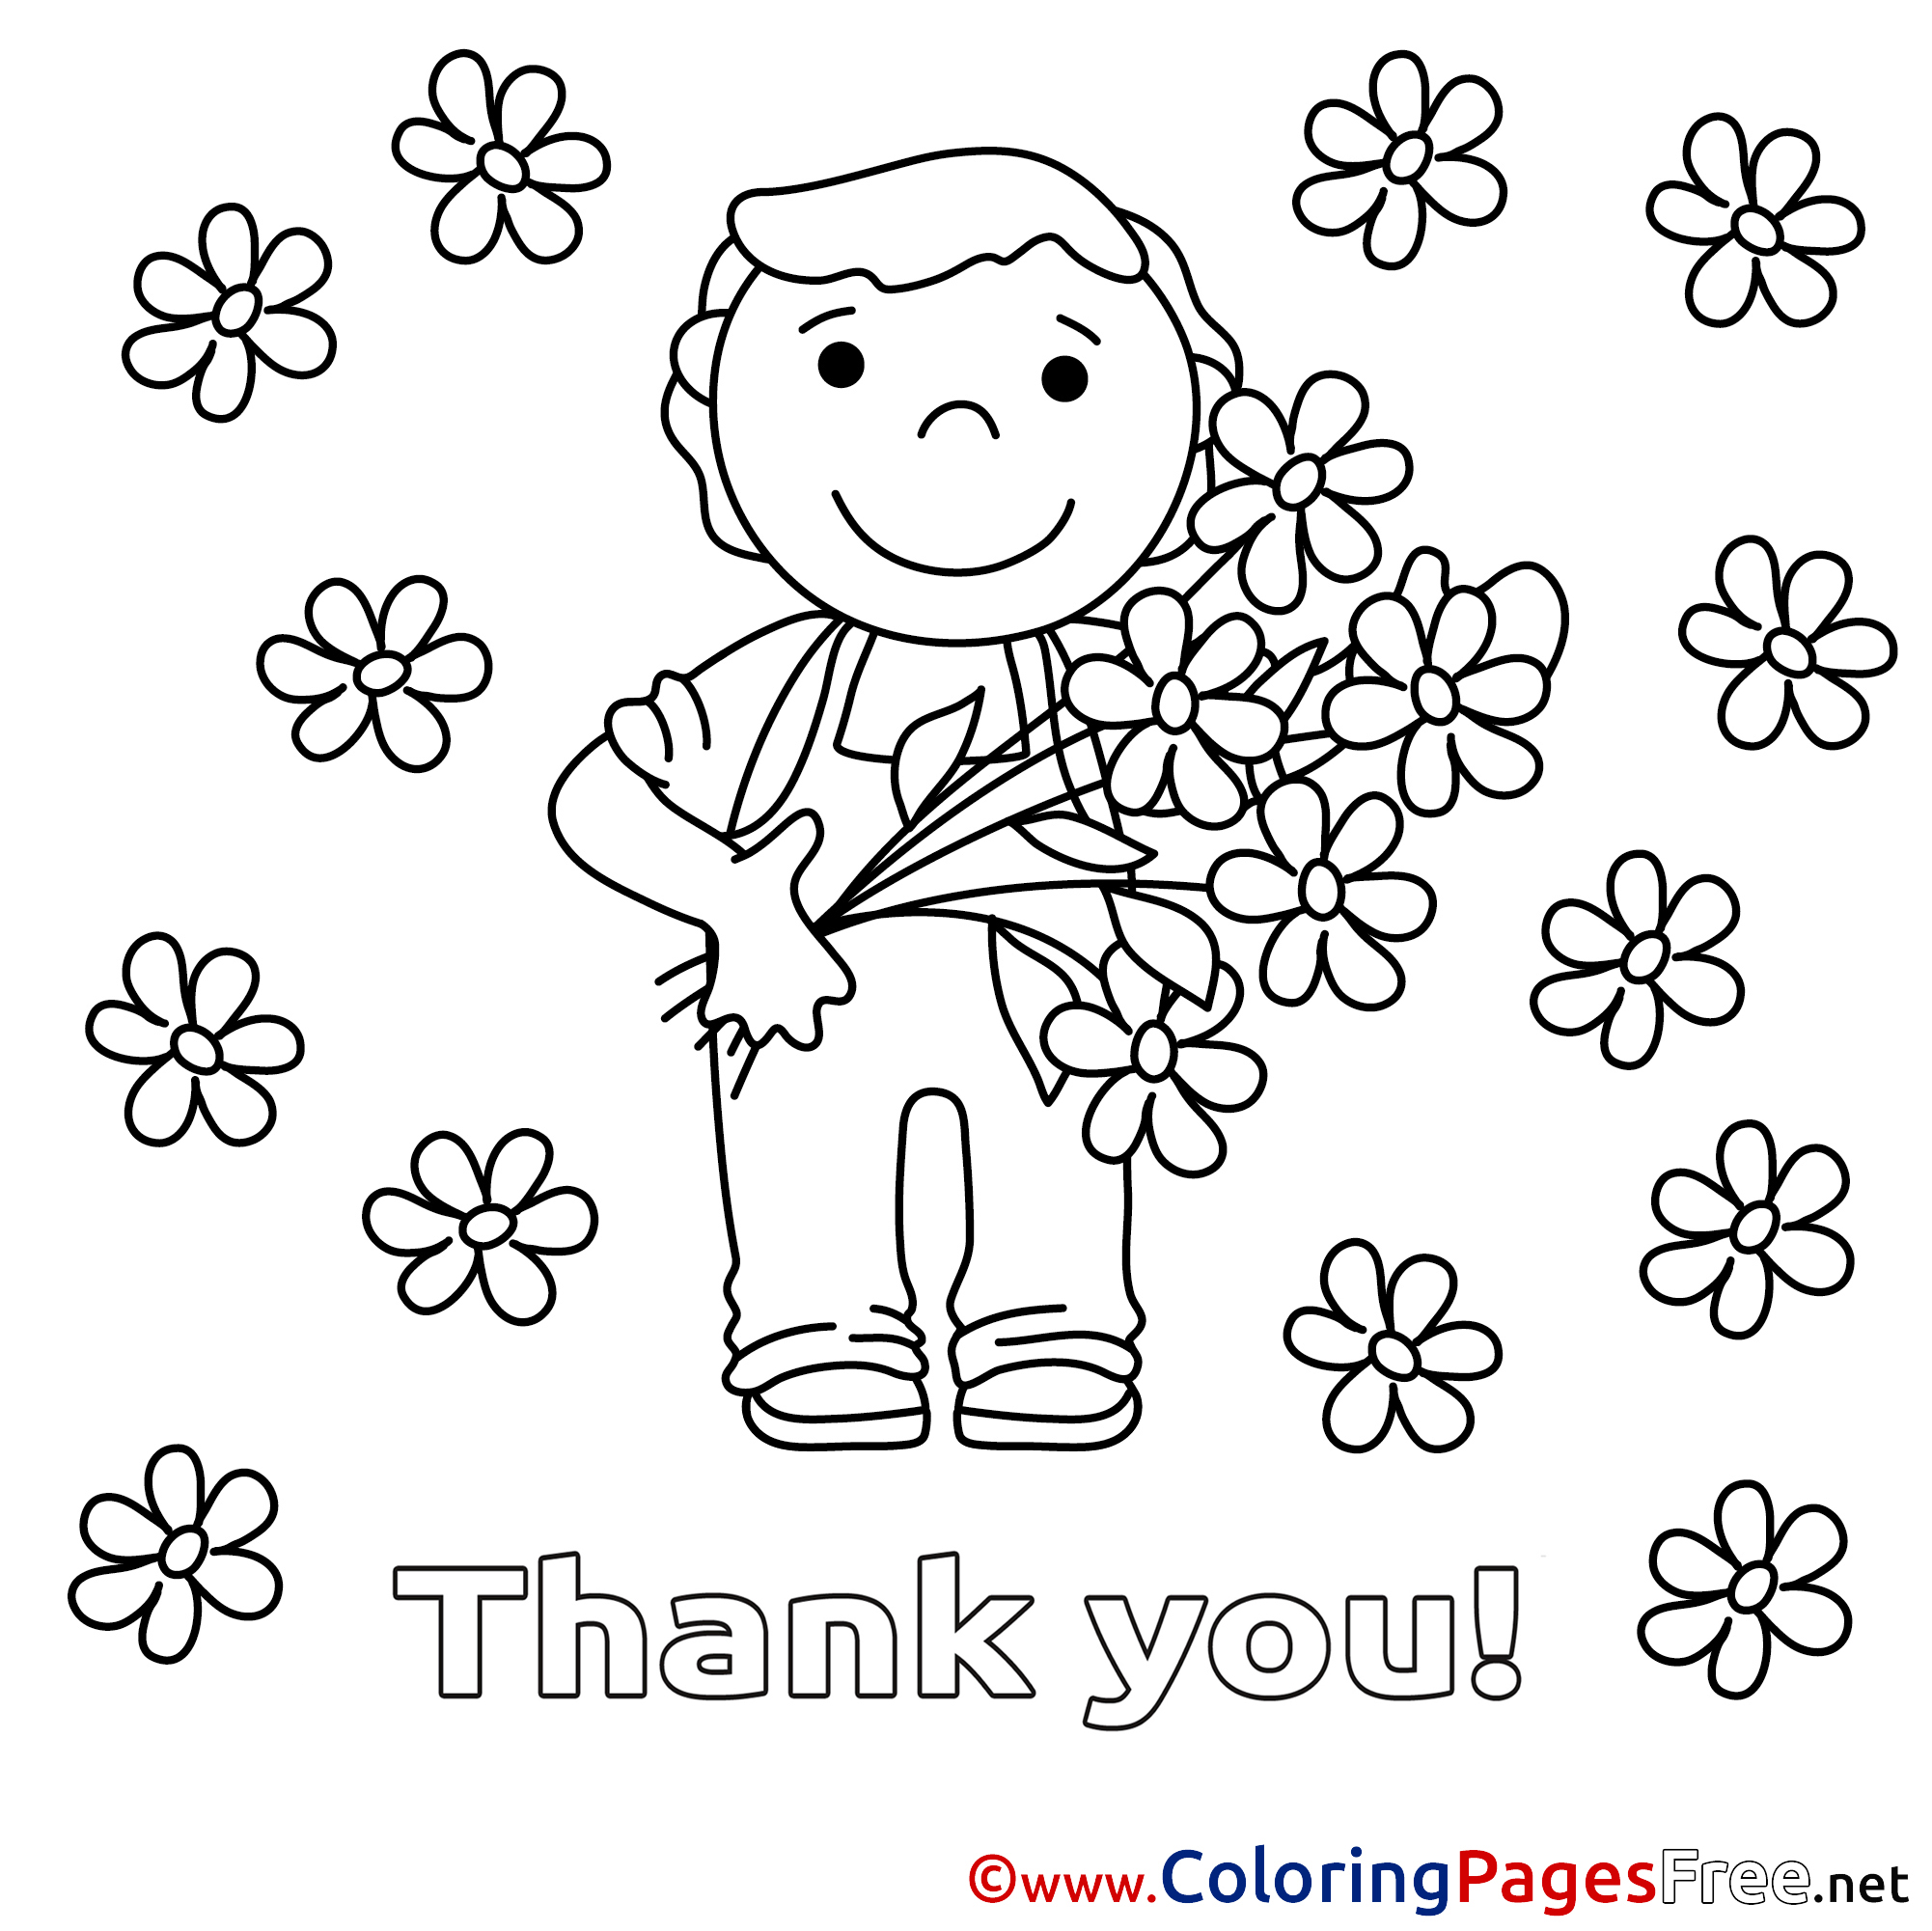 Download Coloring Pages That Say Thank You Coloring Pages